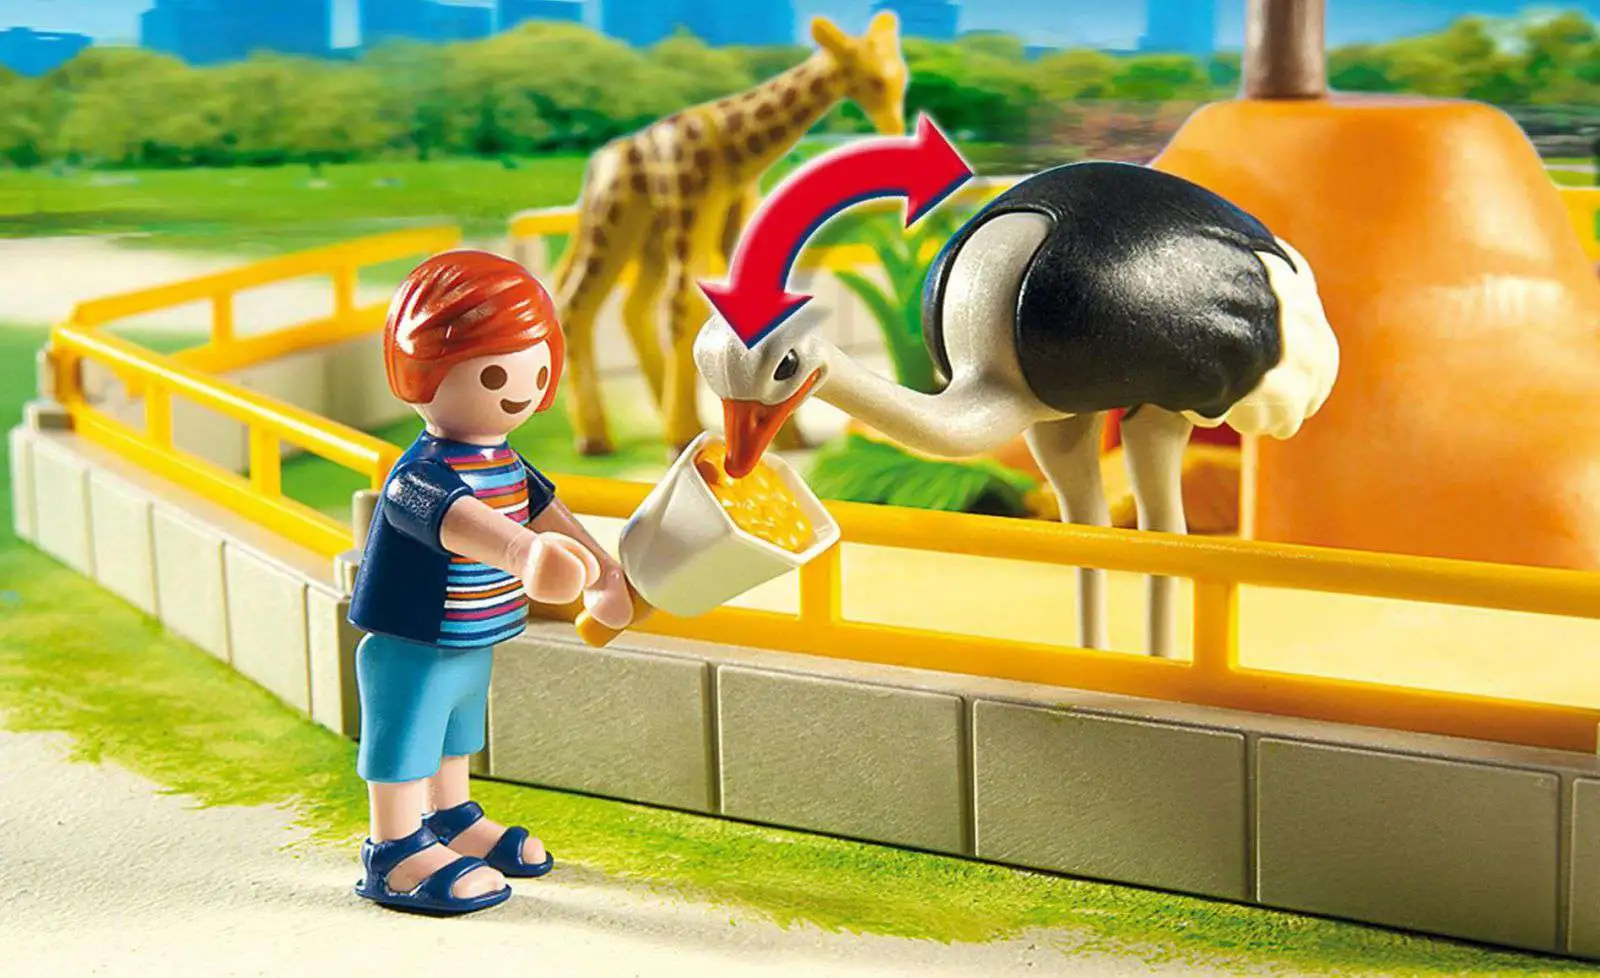 Playmobil 5968 Wild Animal Enclosure Playset Ages 4 Toy Boys Girls Play Gift 